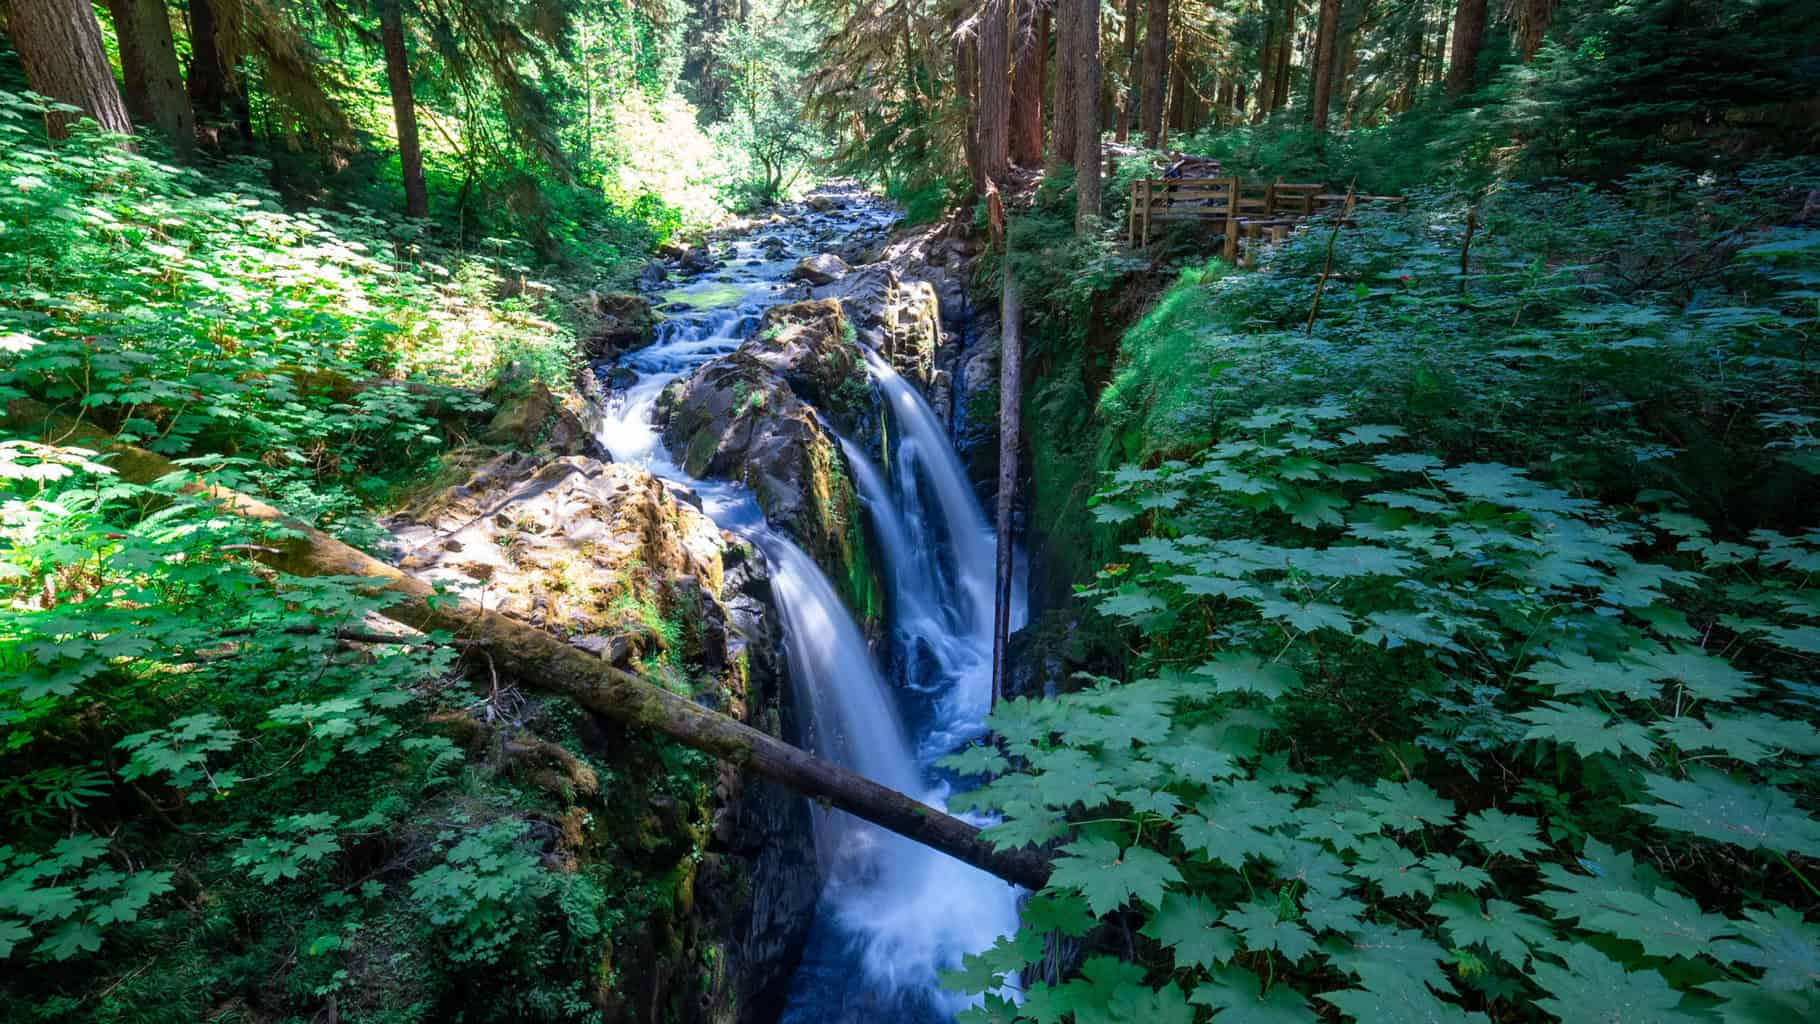 View of Sol Doc Falls with dappled sunlight shining through the rainforest canopy in Olympic National Park during Alice Ford's 4-day solo hiking journey